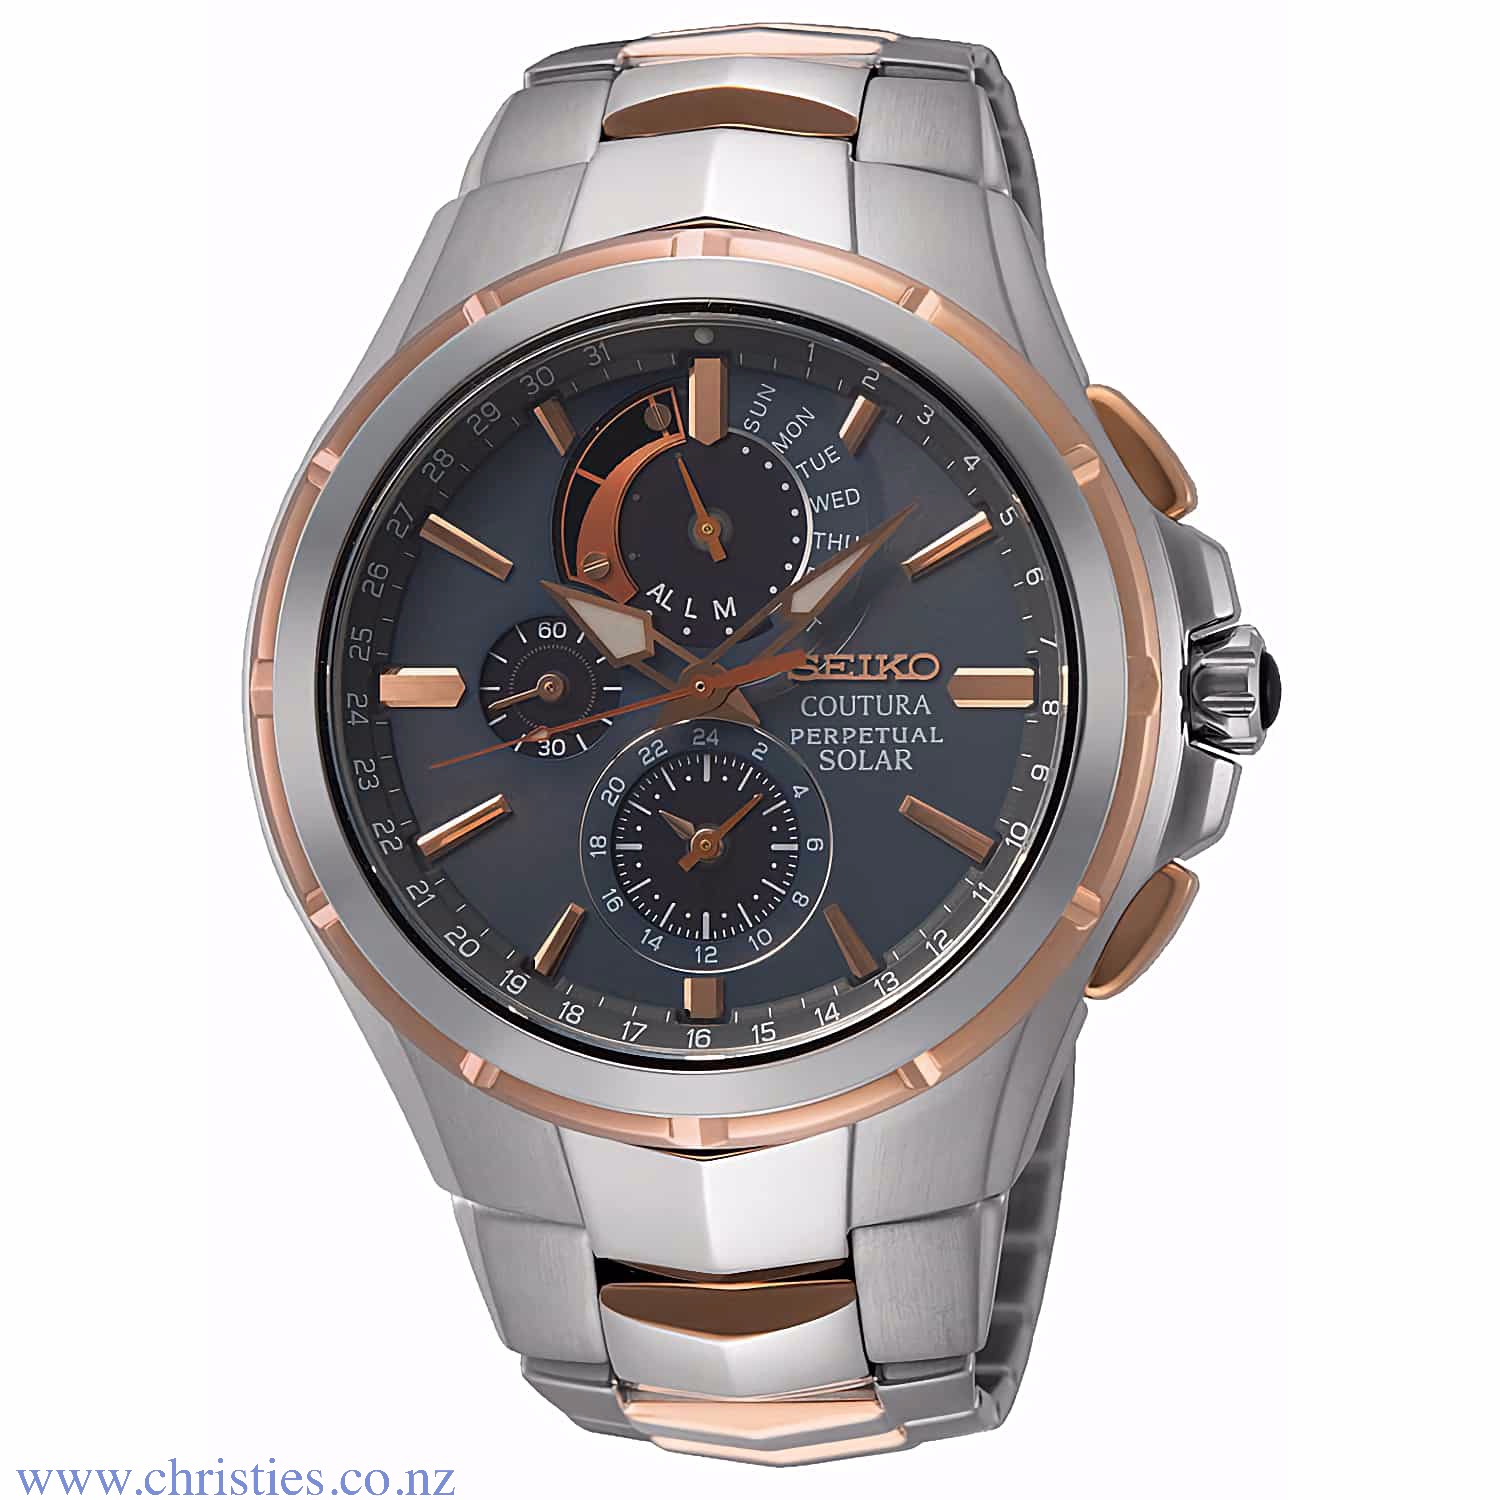 SSC788P-9 SEIKO Coutura Solar Perpetual Chronograph Watch. Seiko Coutura SSC788P-9 Chronograph Solar TT Mens Watch, classic everyday style in rose and silver LAYBUY - Pay it easy, in 6 weekly payments and have it now. Only pay the price of your purchase, 